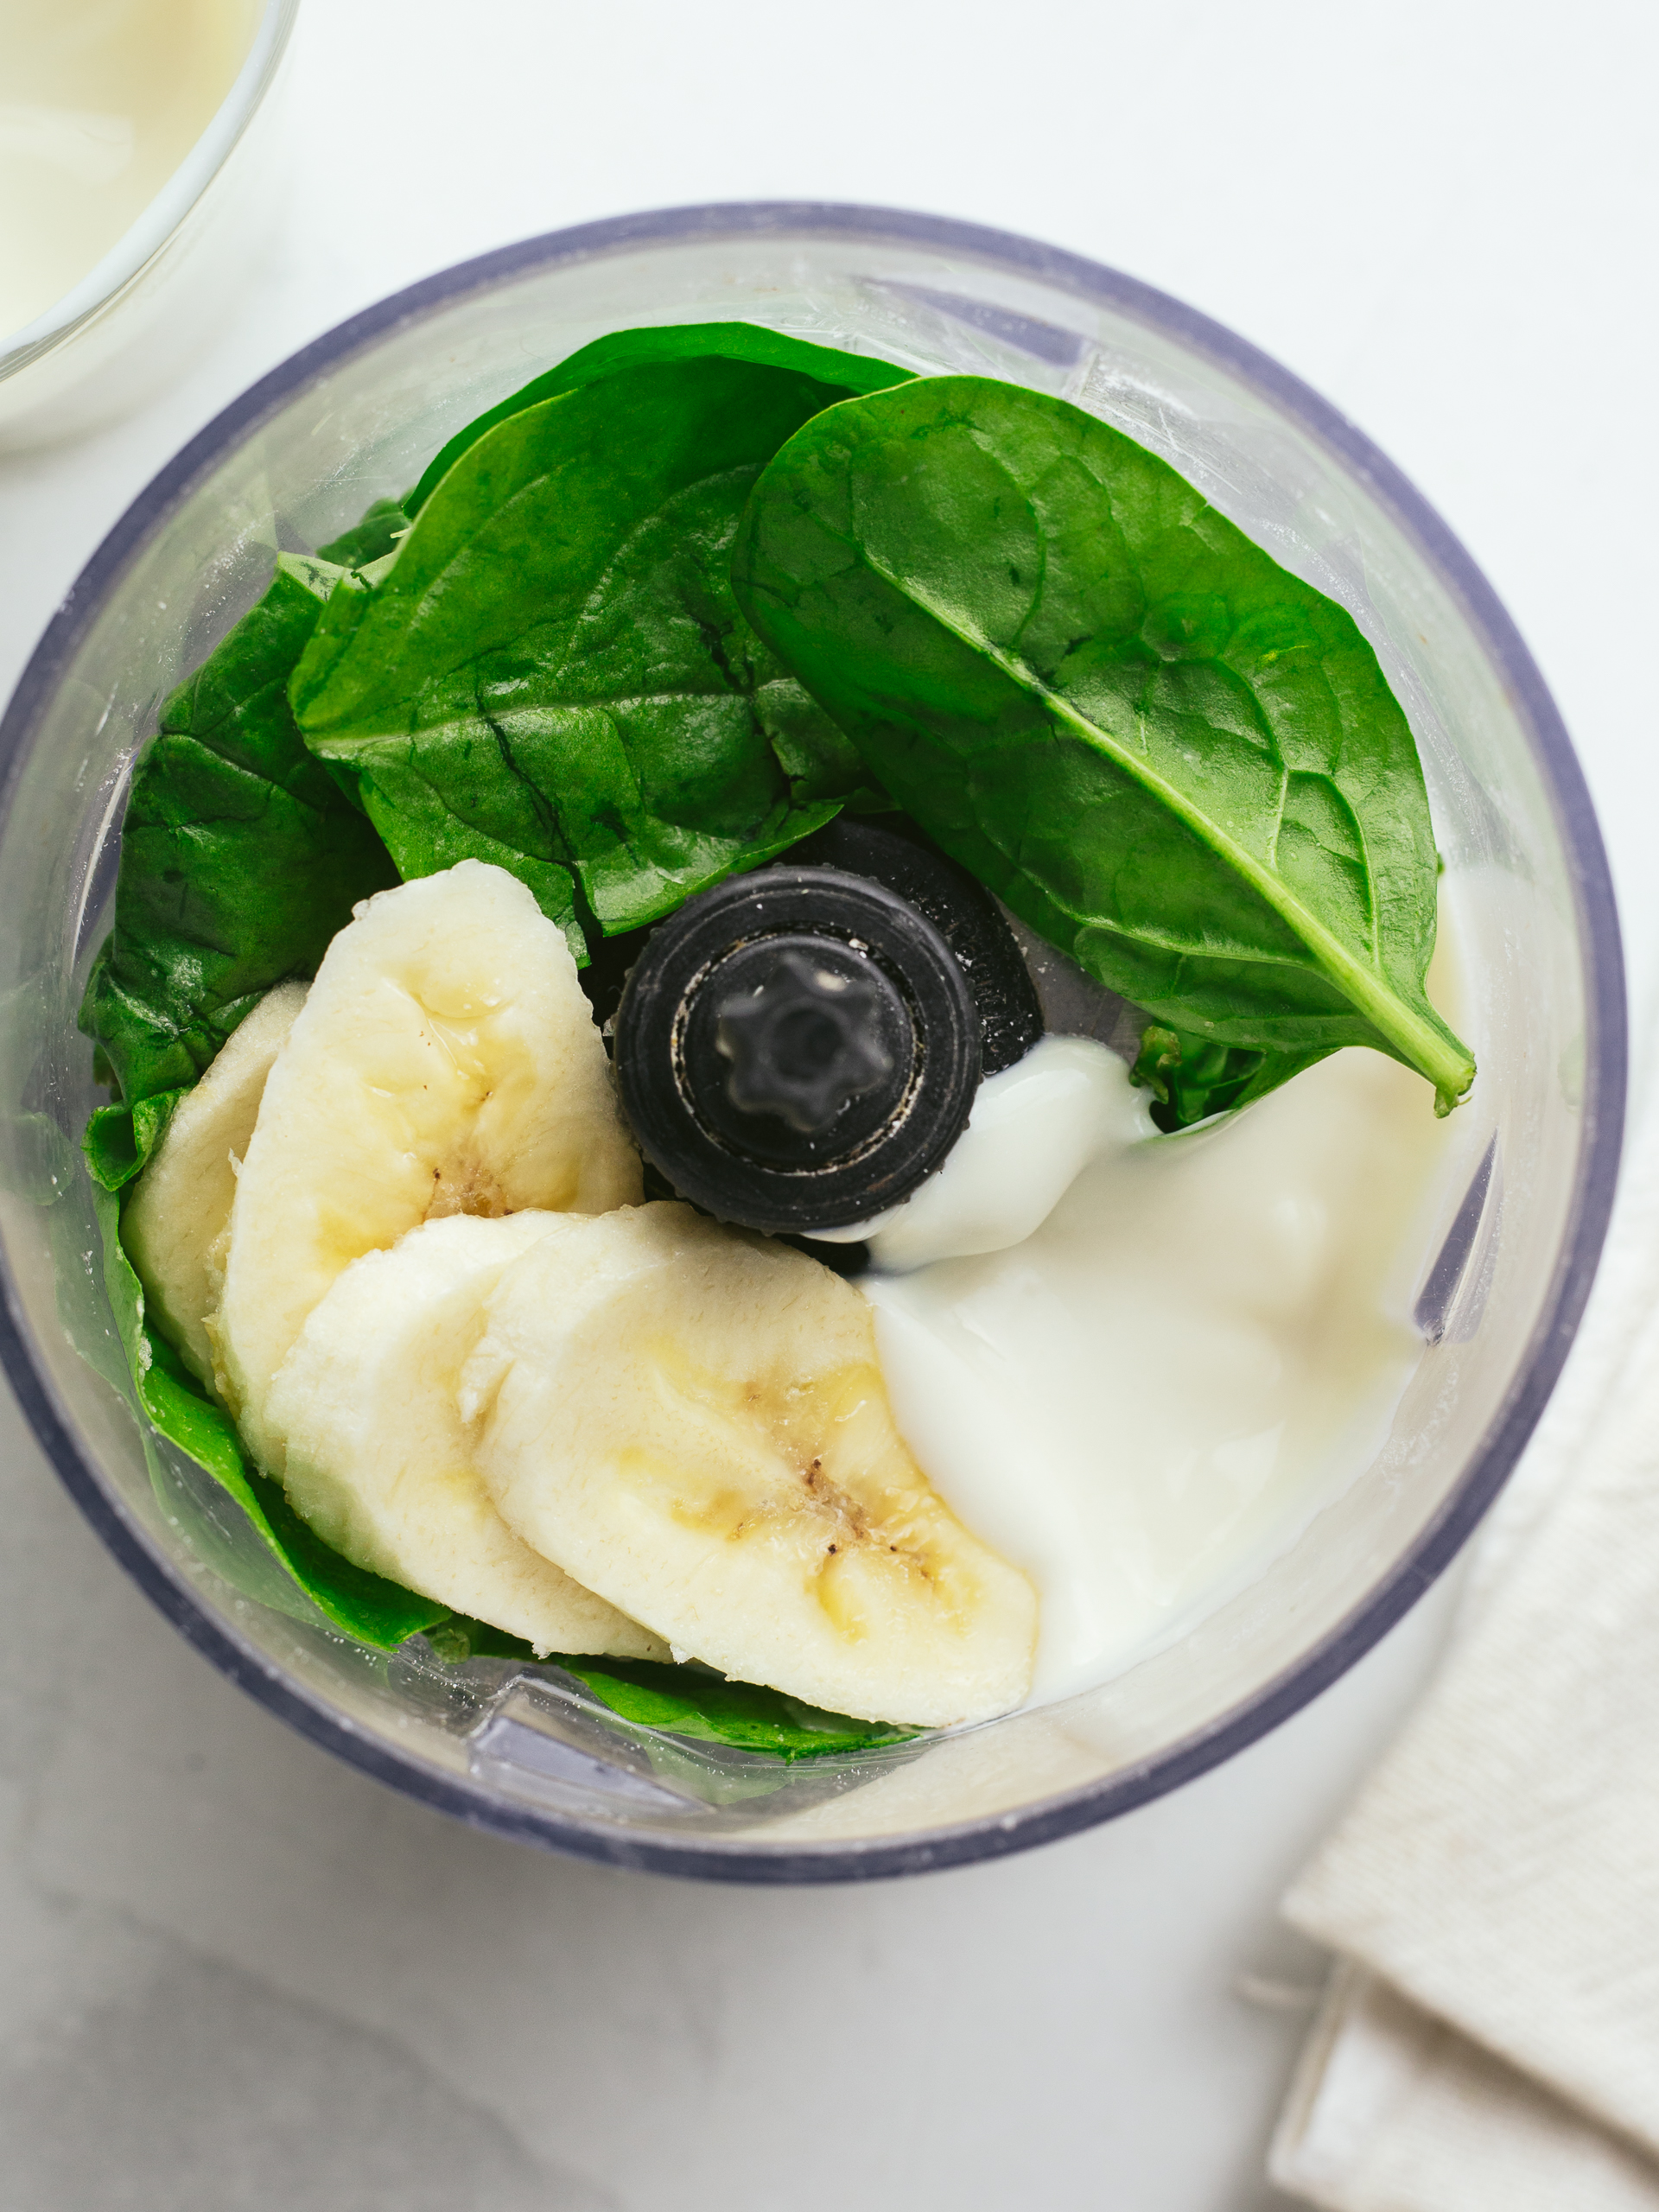 spinach banana and yoghurt in a blender